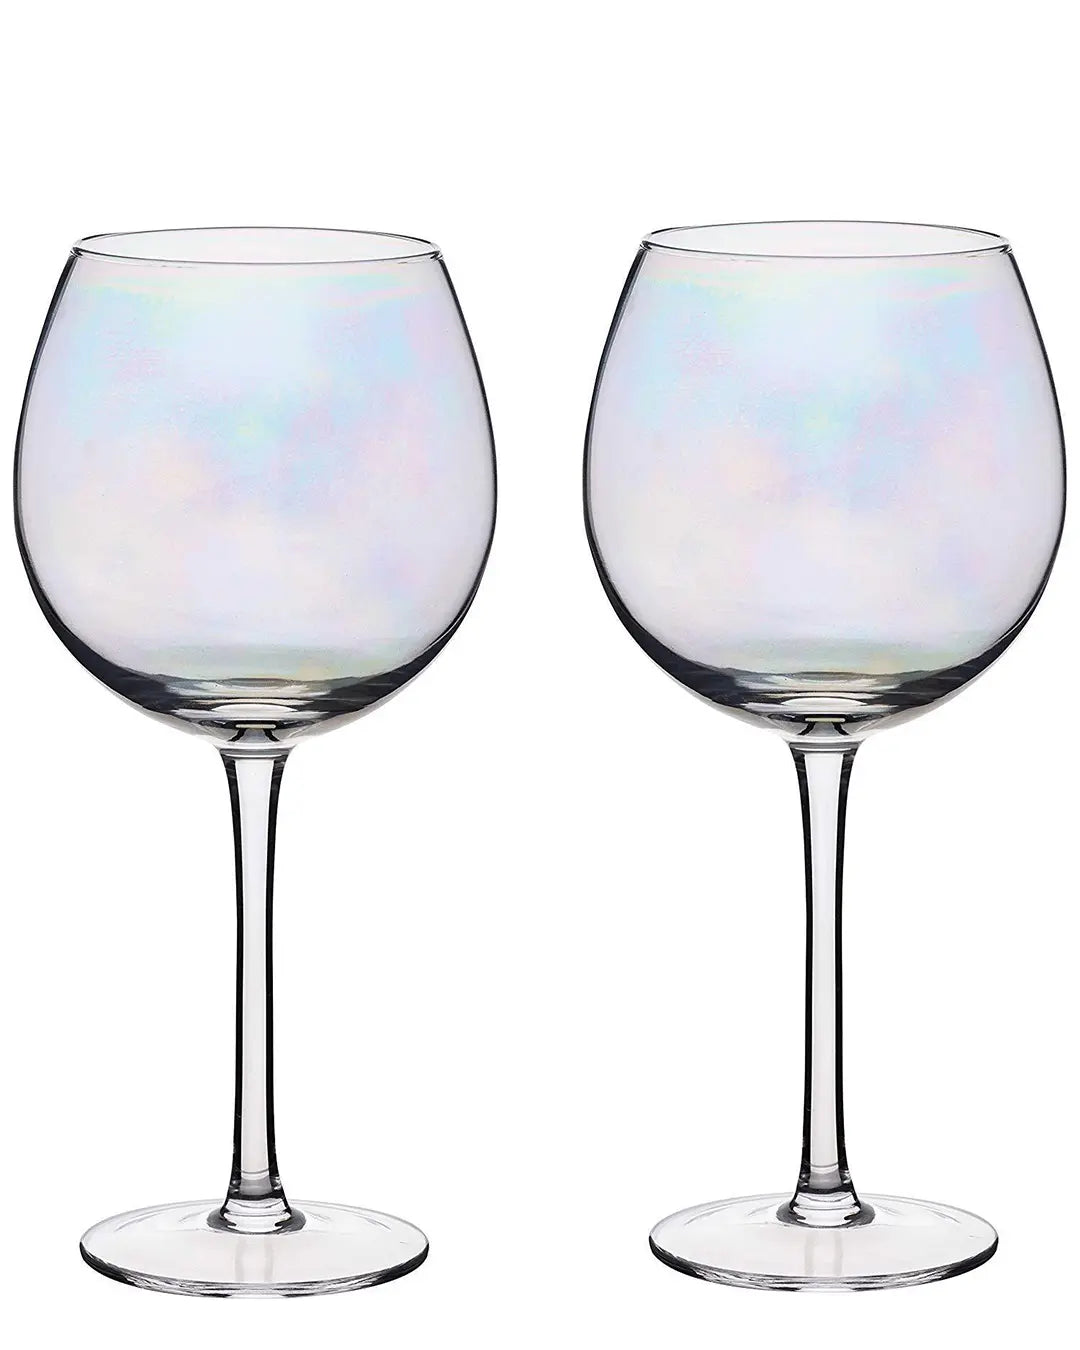 BarCraft Set of Two Iridescent Gin Glasses Tableware